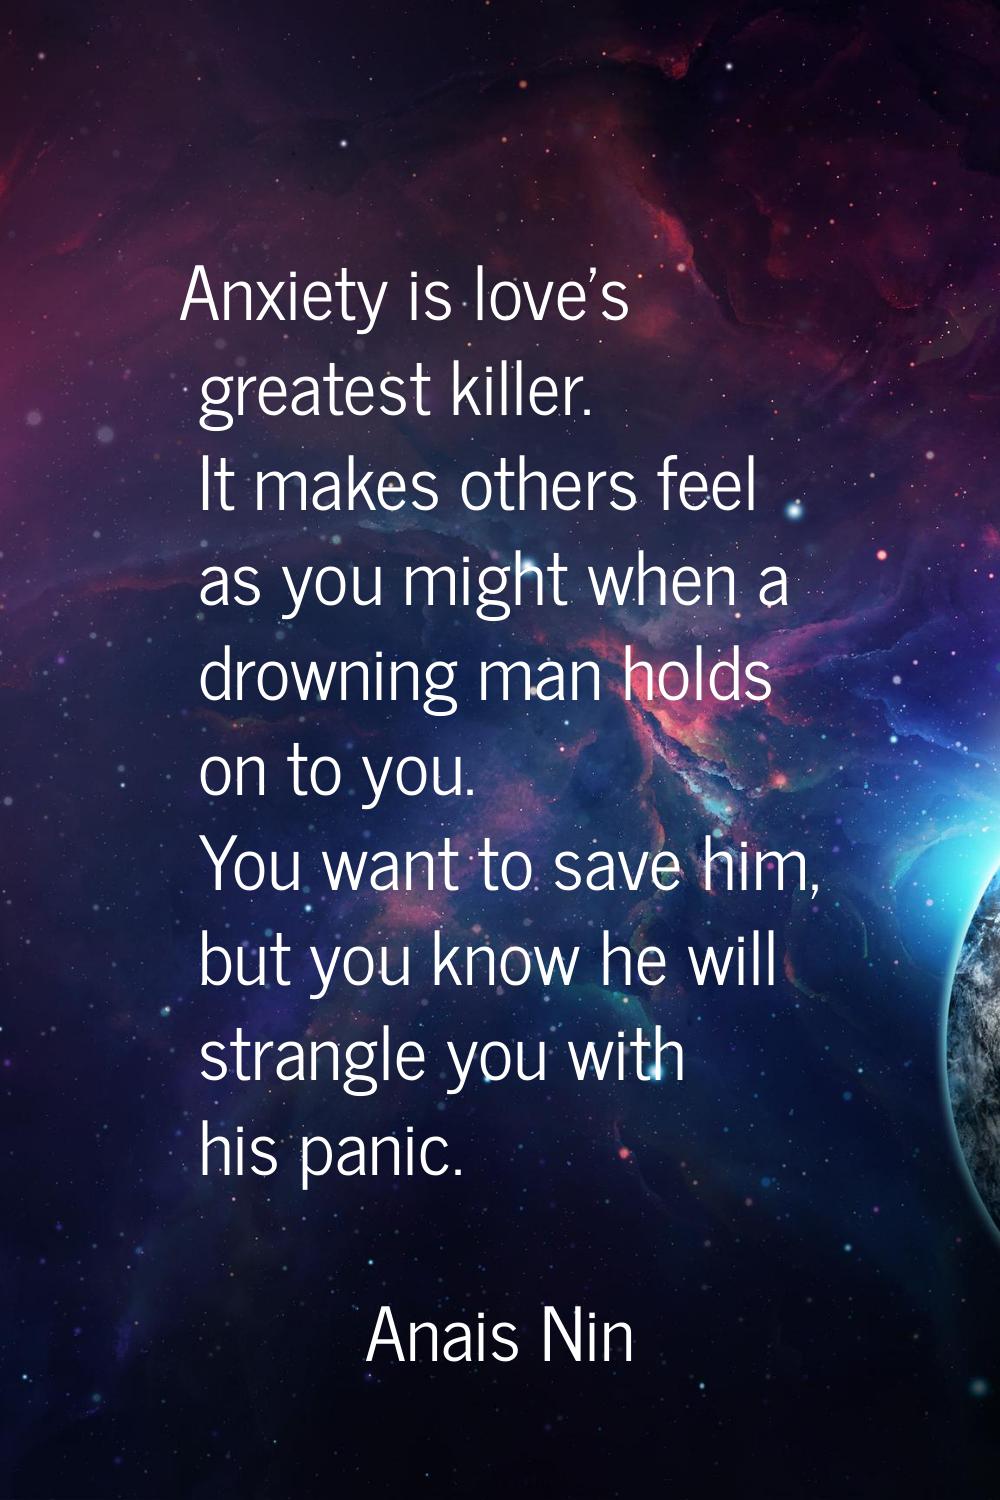 Anxiety is love's greatest killer. It makes others feel as you might when a drowning man holds on t